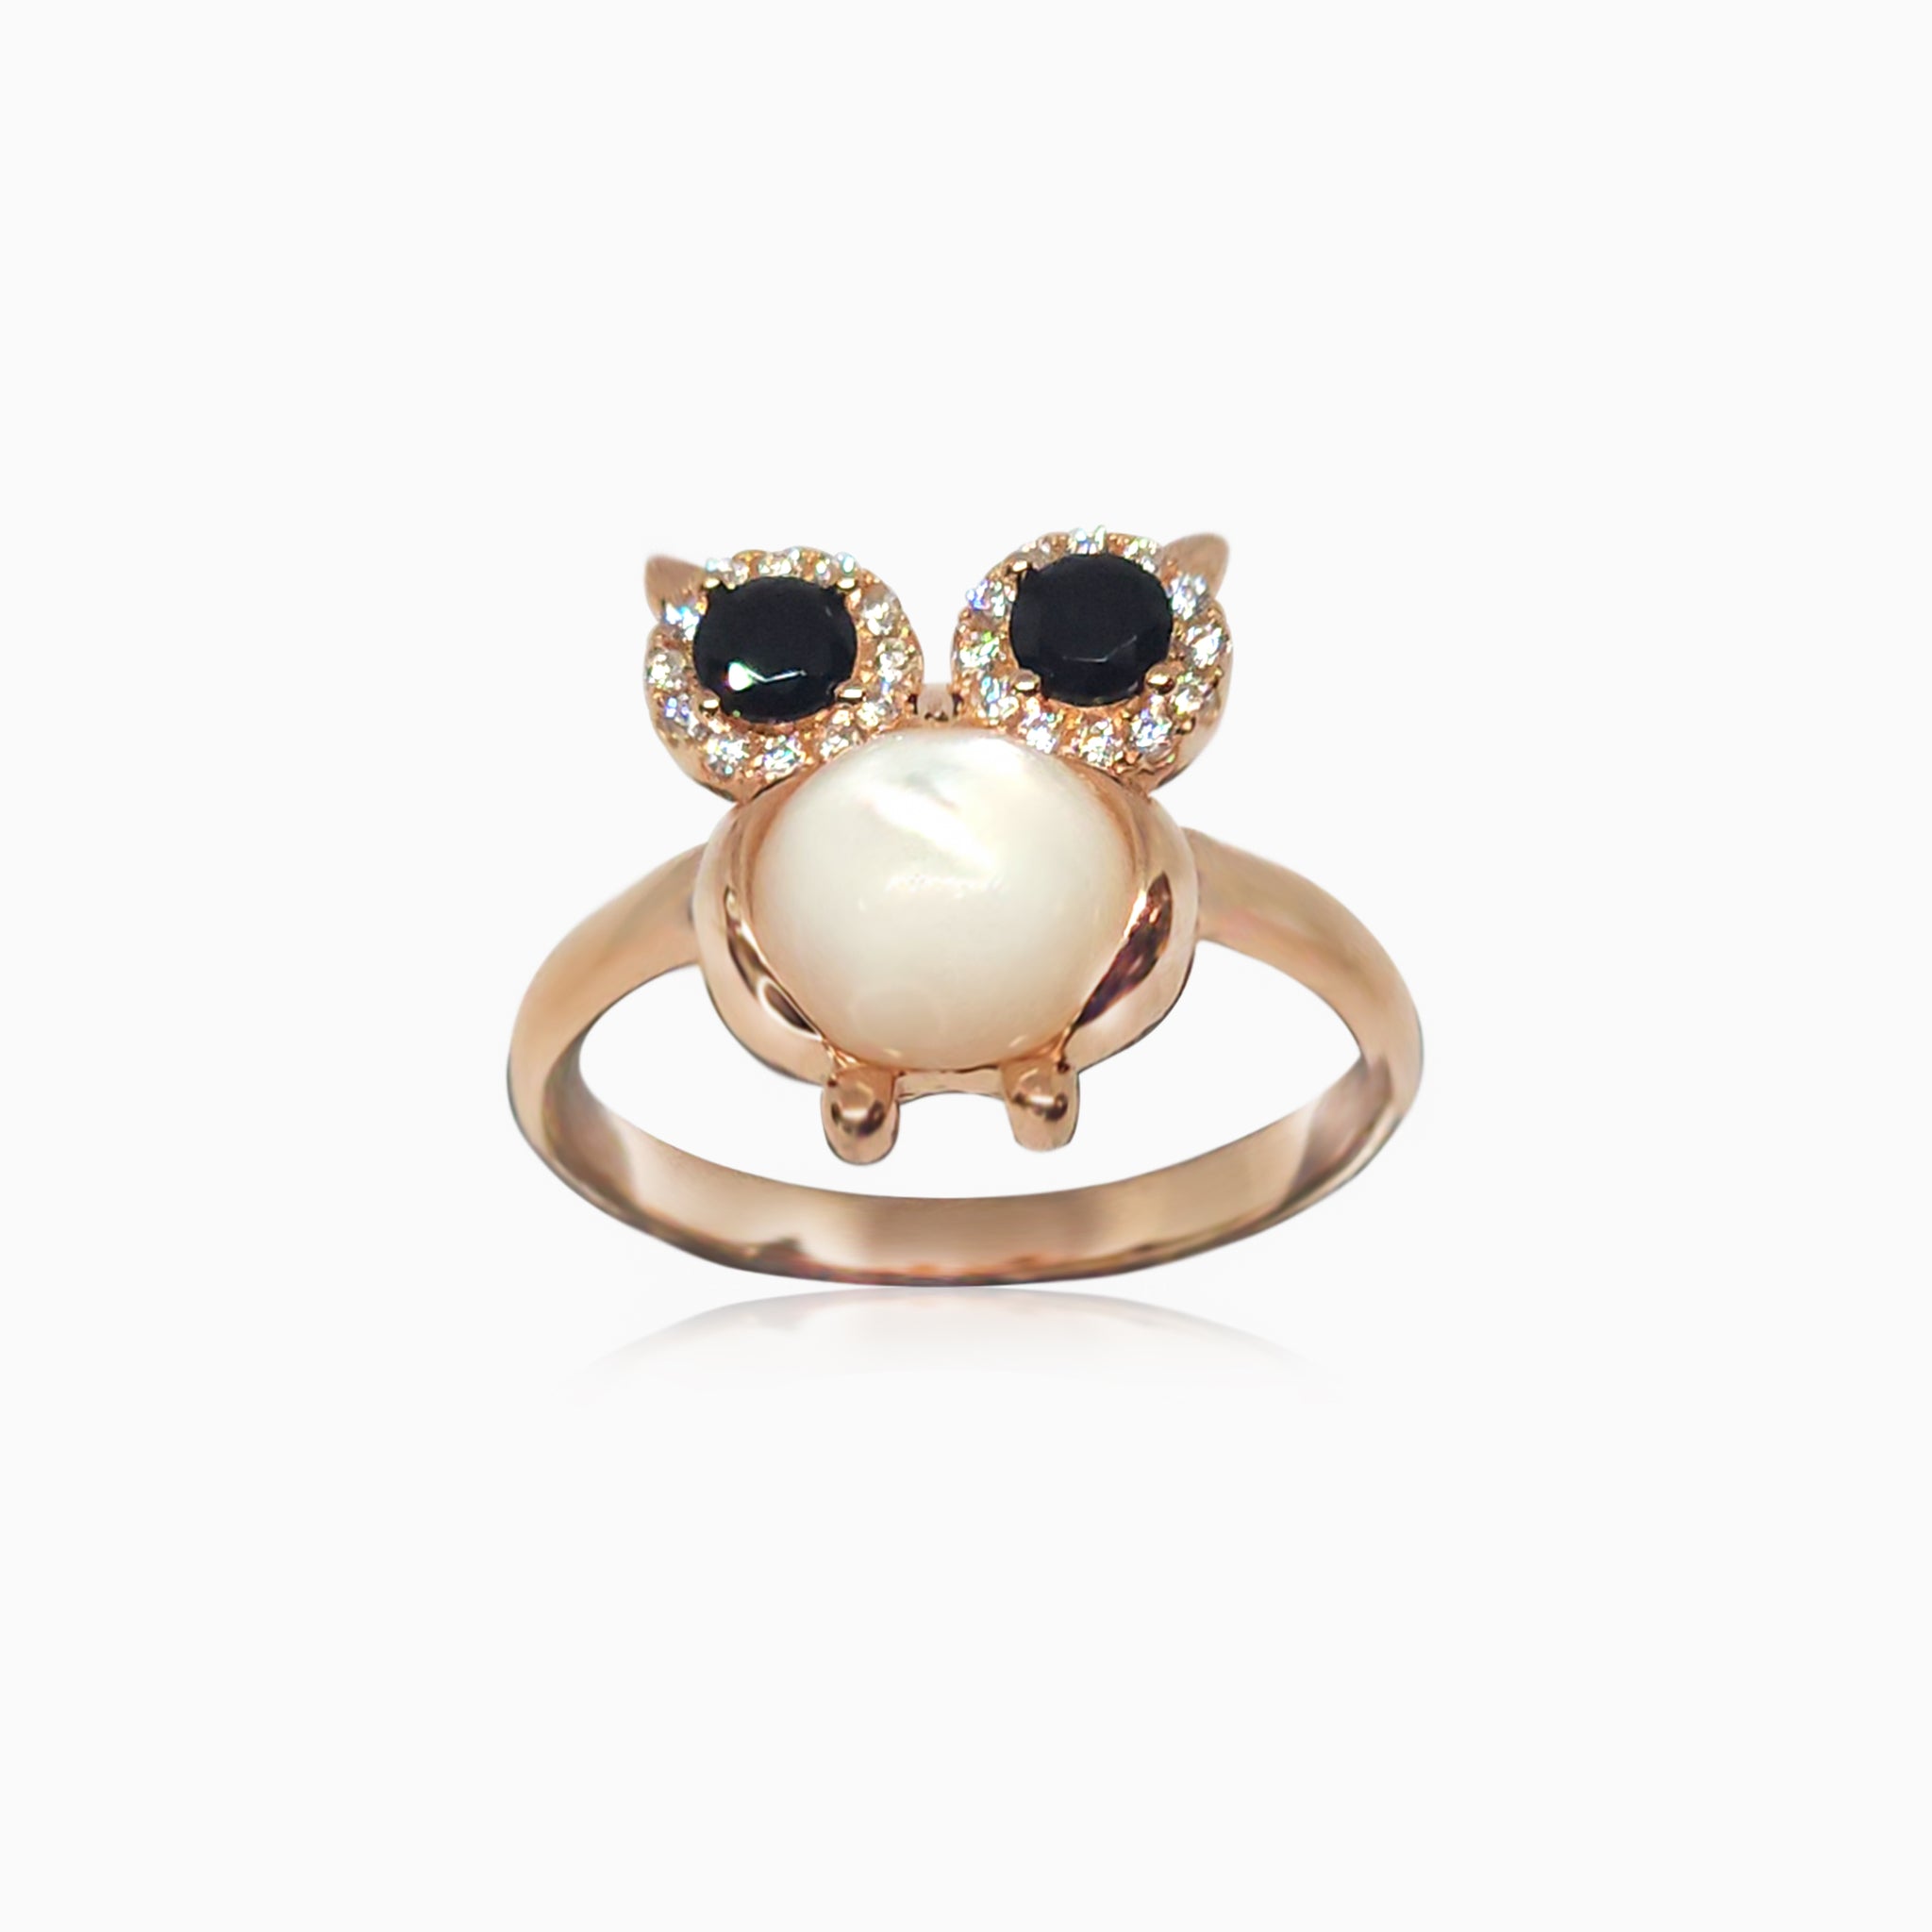 Silver Rose Gold Moonstone Owl Ring